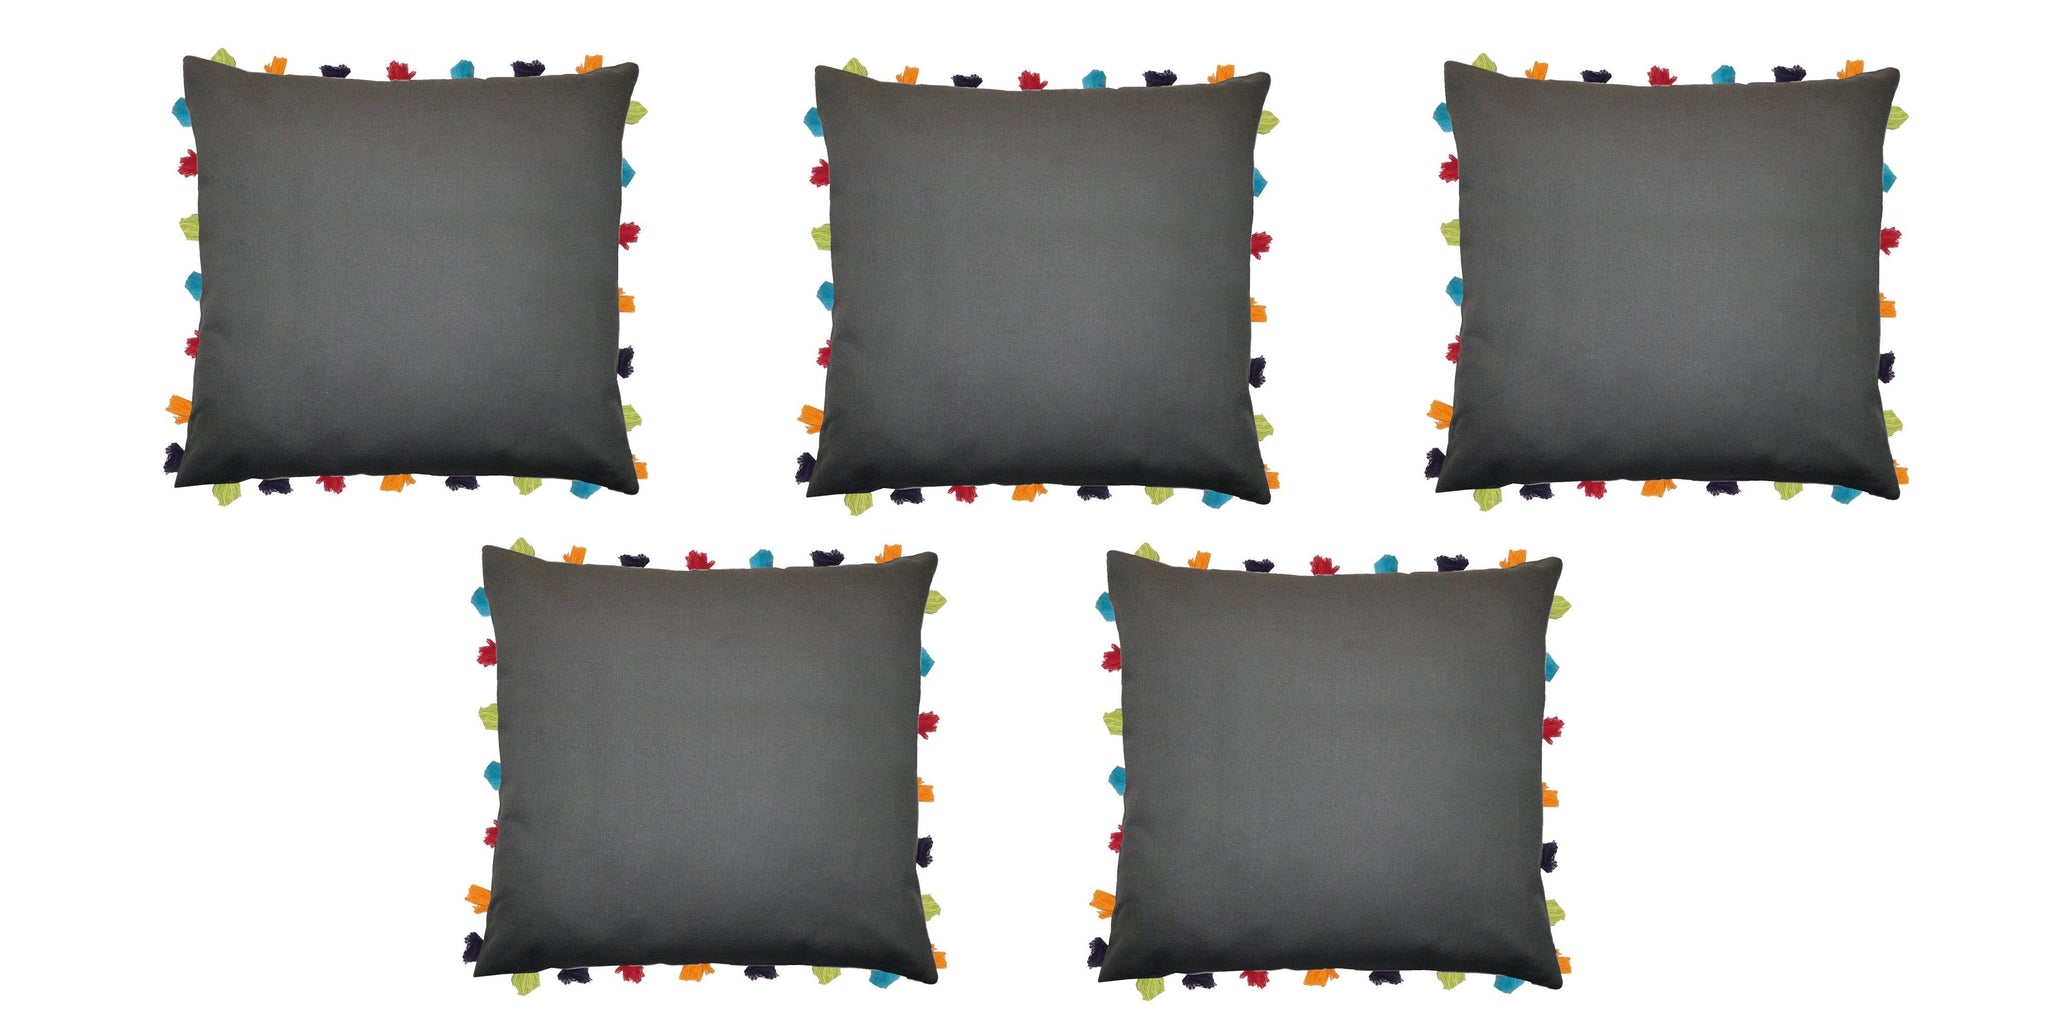 Lushomes Sedona Sage Cushion Cover with Colorful tassels (5 pcs, 20 x 20”) - Lushomes